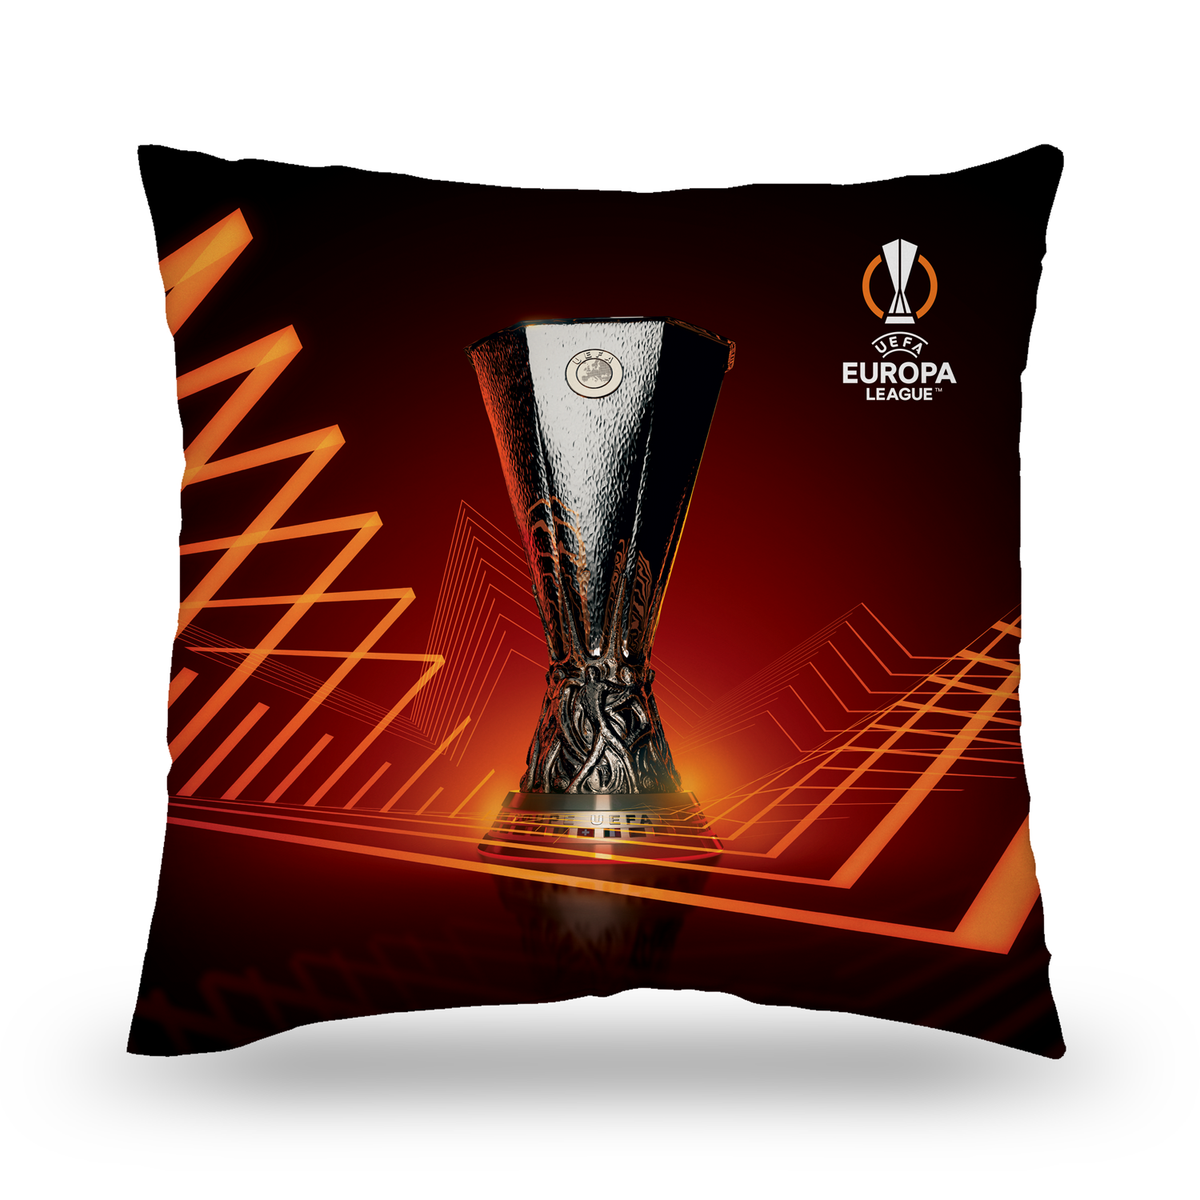 UEFA Europa League Trophy Cushion UEFA Club Competitions Online Store